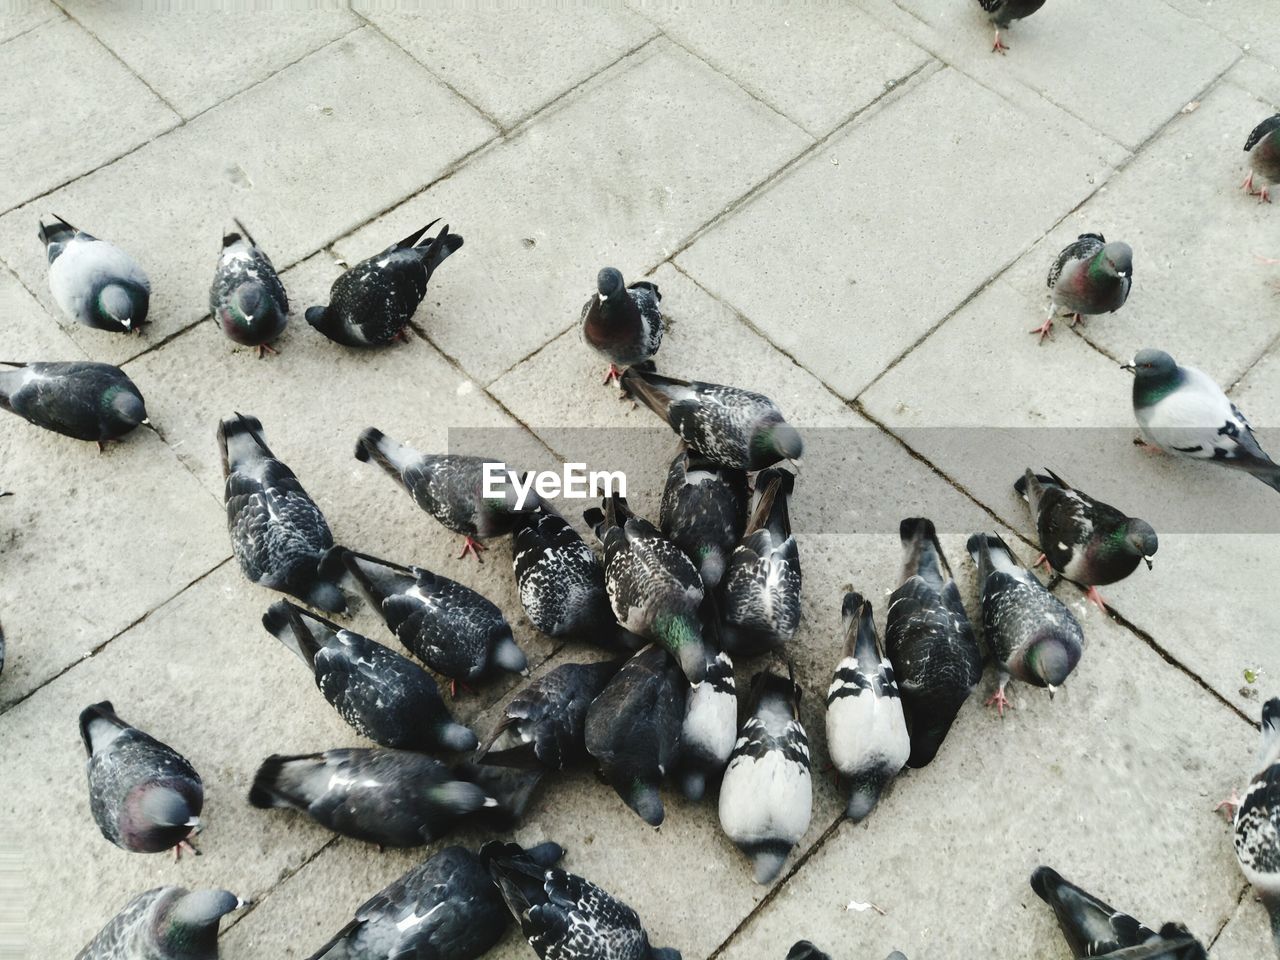 HIGH ANGLE VIEW OF PIGEONS ON FLOOR IN CITY